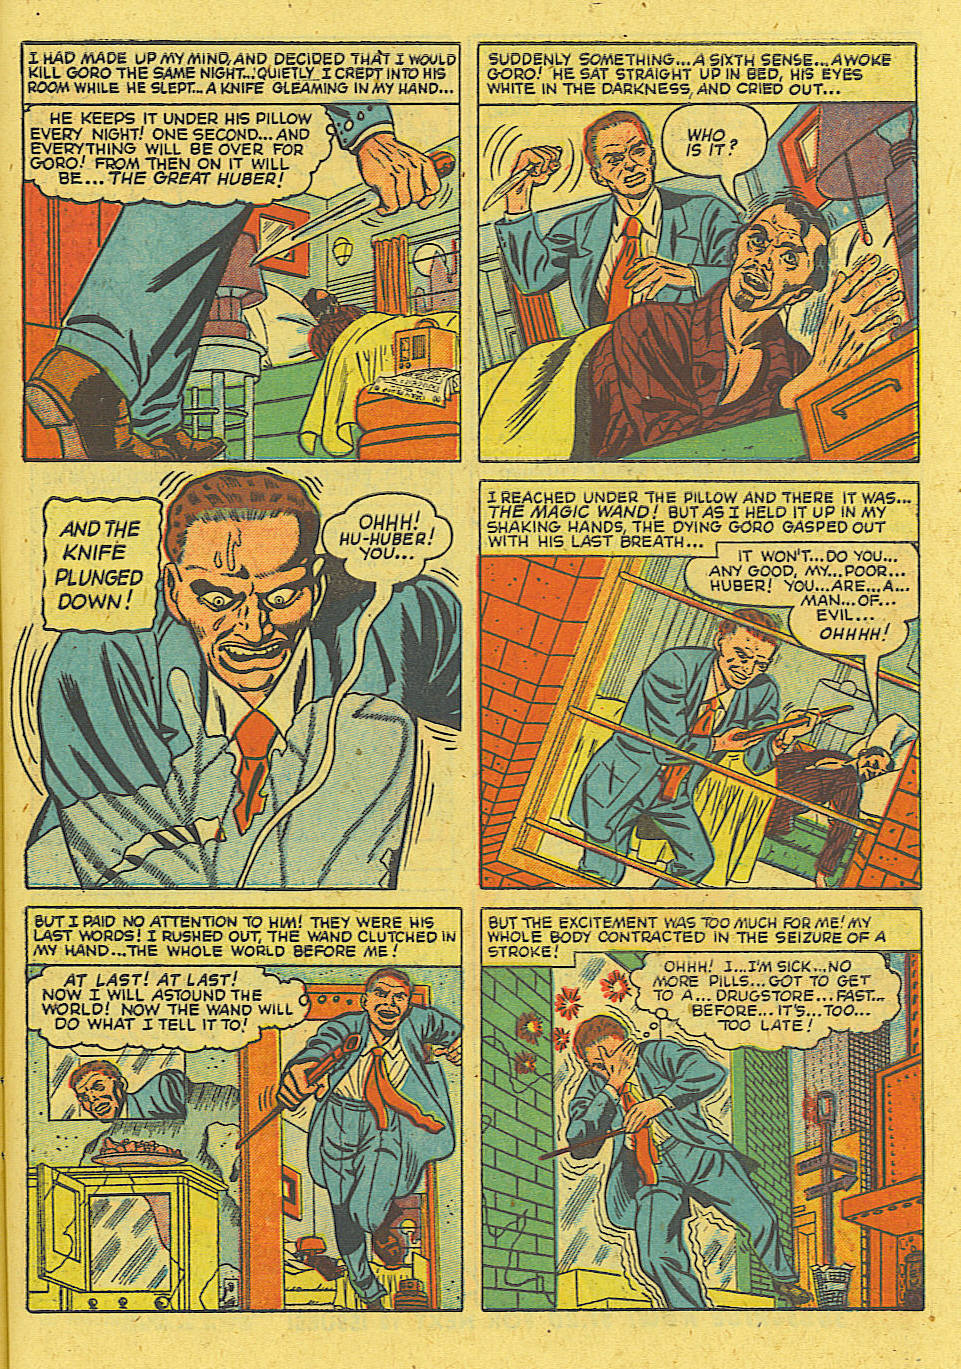 Marvel Tales (1949) 103 Page 22